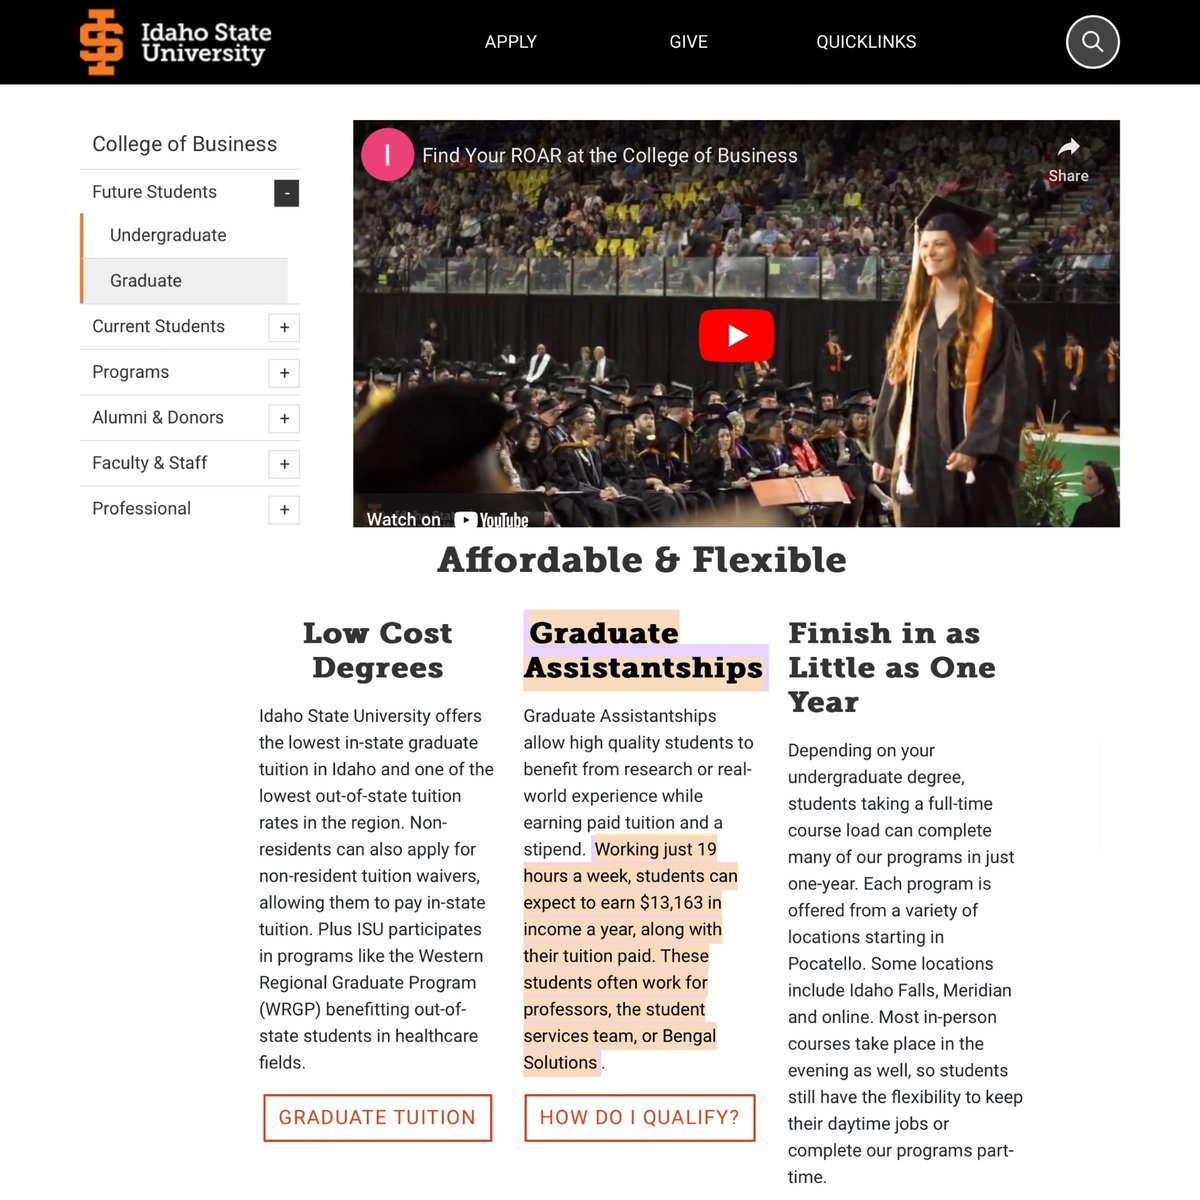 Tuition fees + Up to $13,163 per year for MA&PhD students at Idaho State University, USA (graduate assistantships) Deadline: June 1, 2024 Want to work with me? I will guide you to apply for 3 scholarships. DM for terms